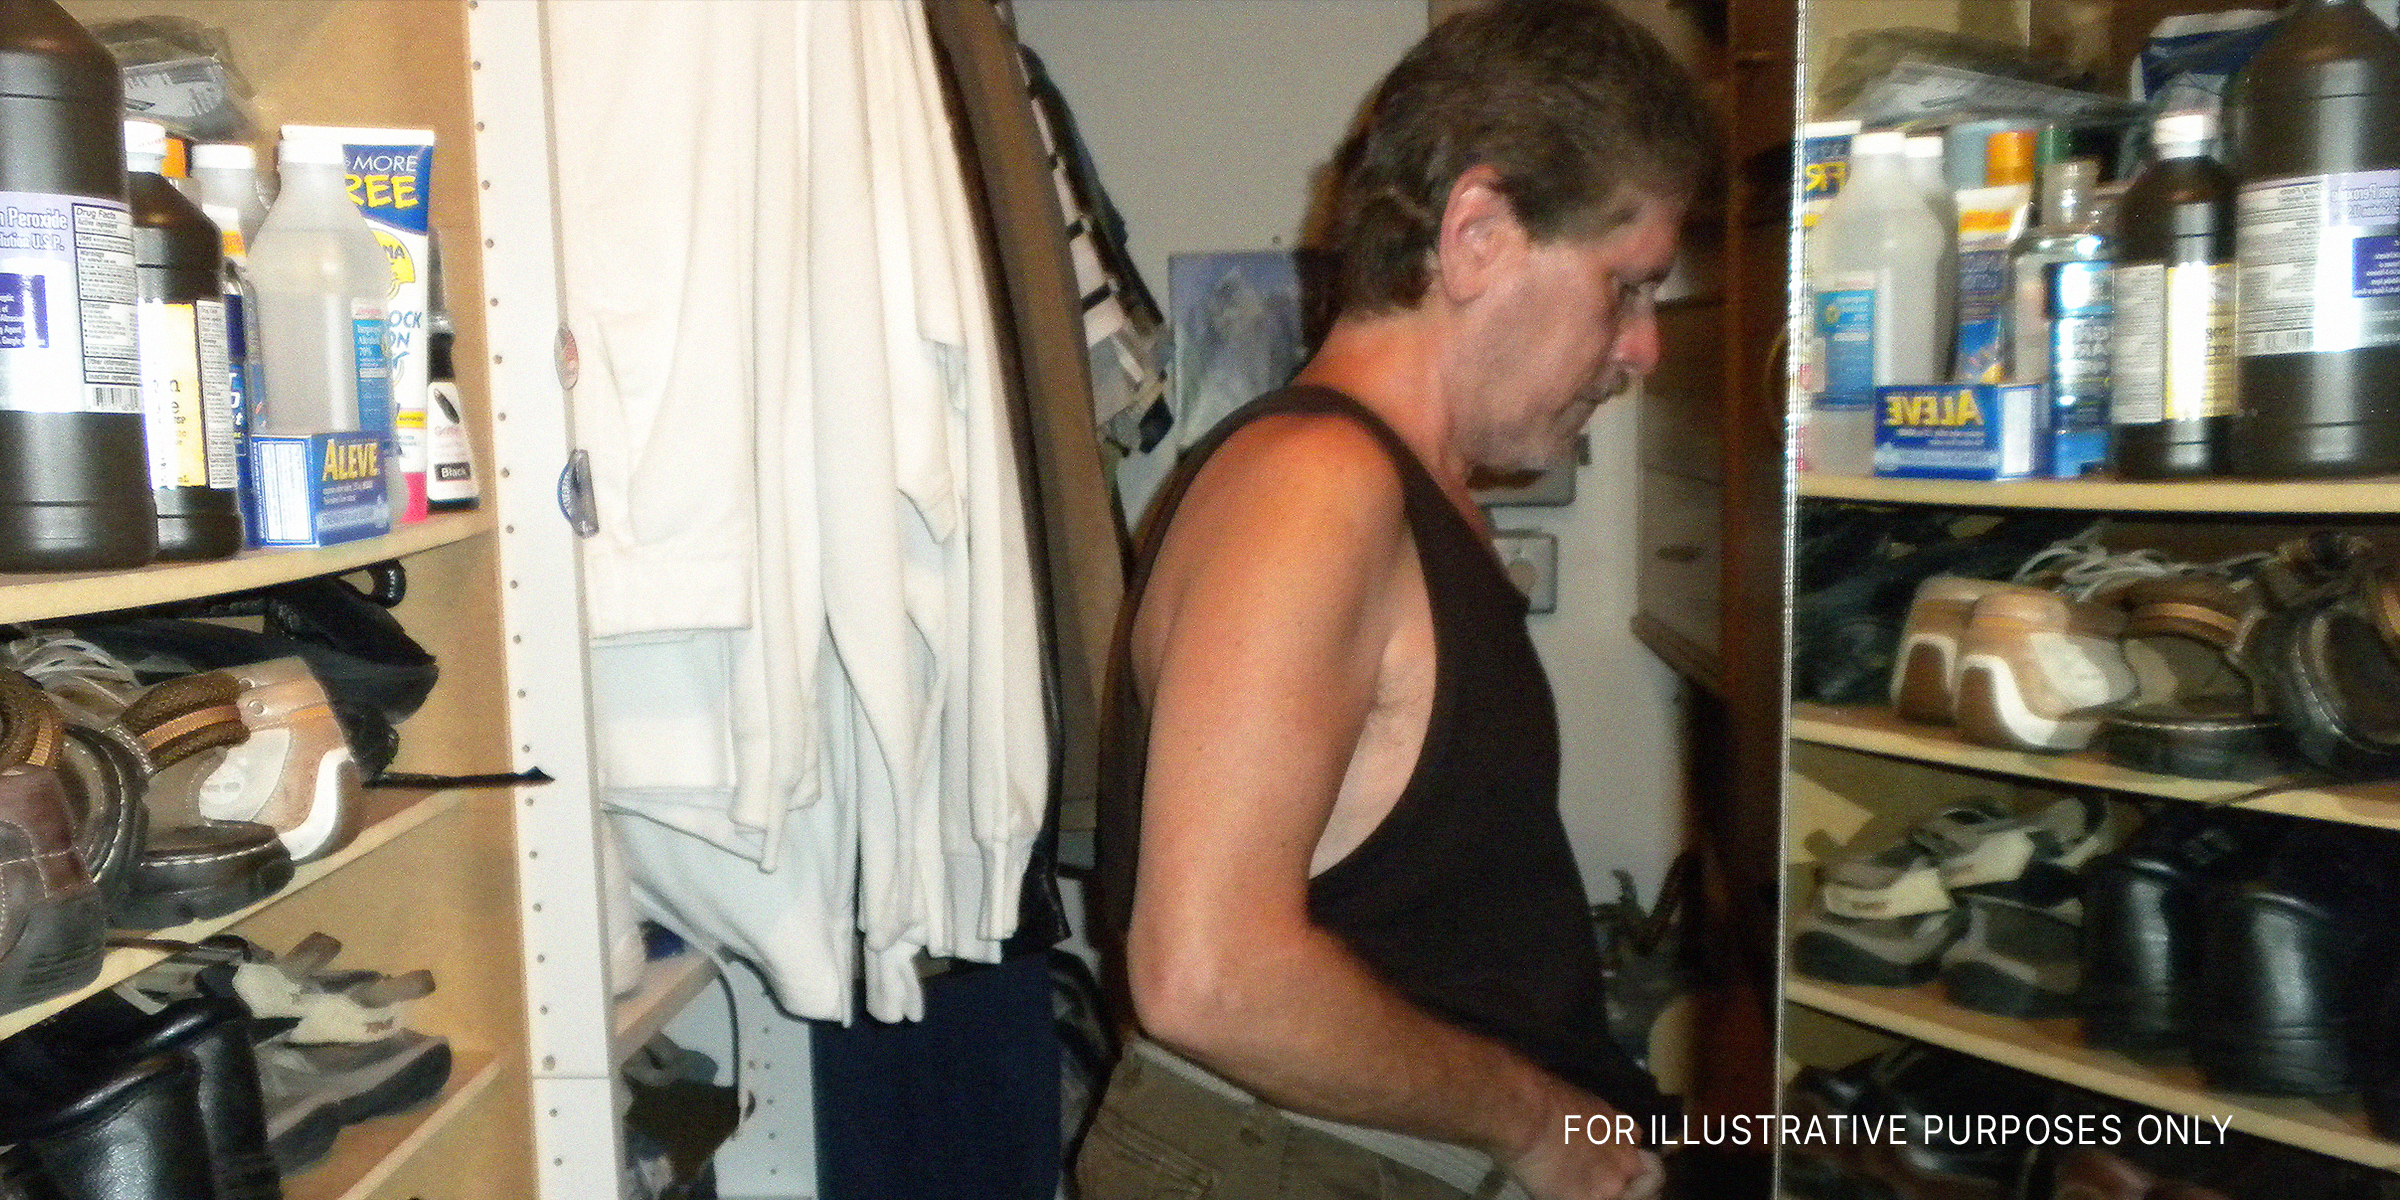 A man dressing in a closet | Source: Flickr